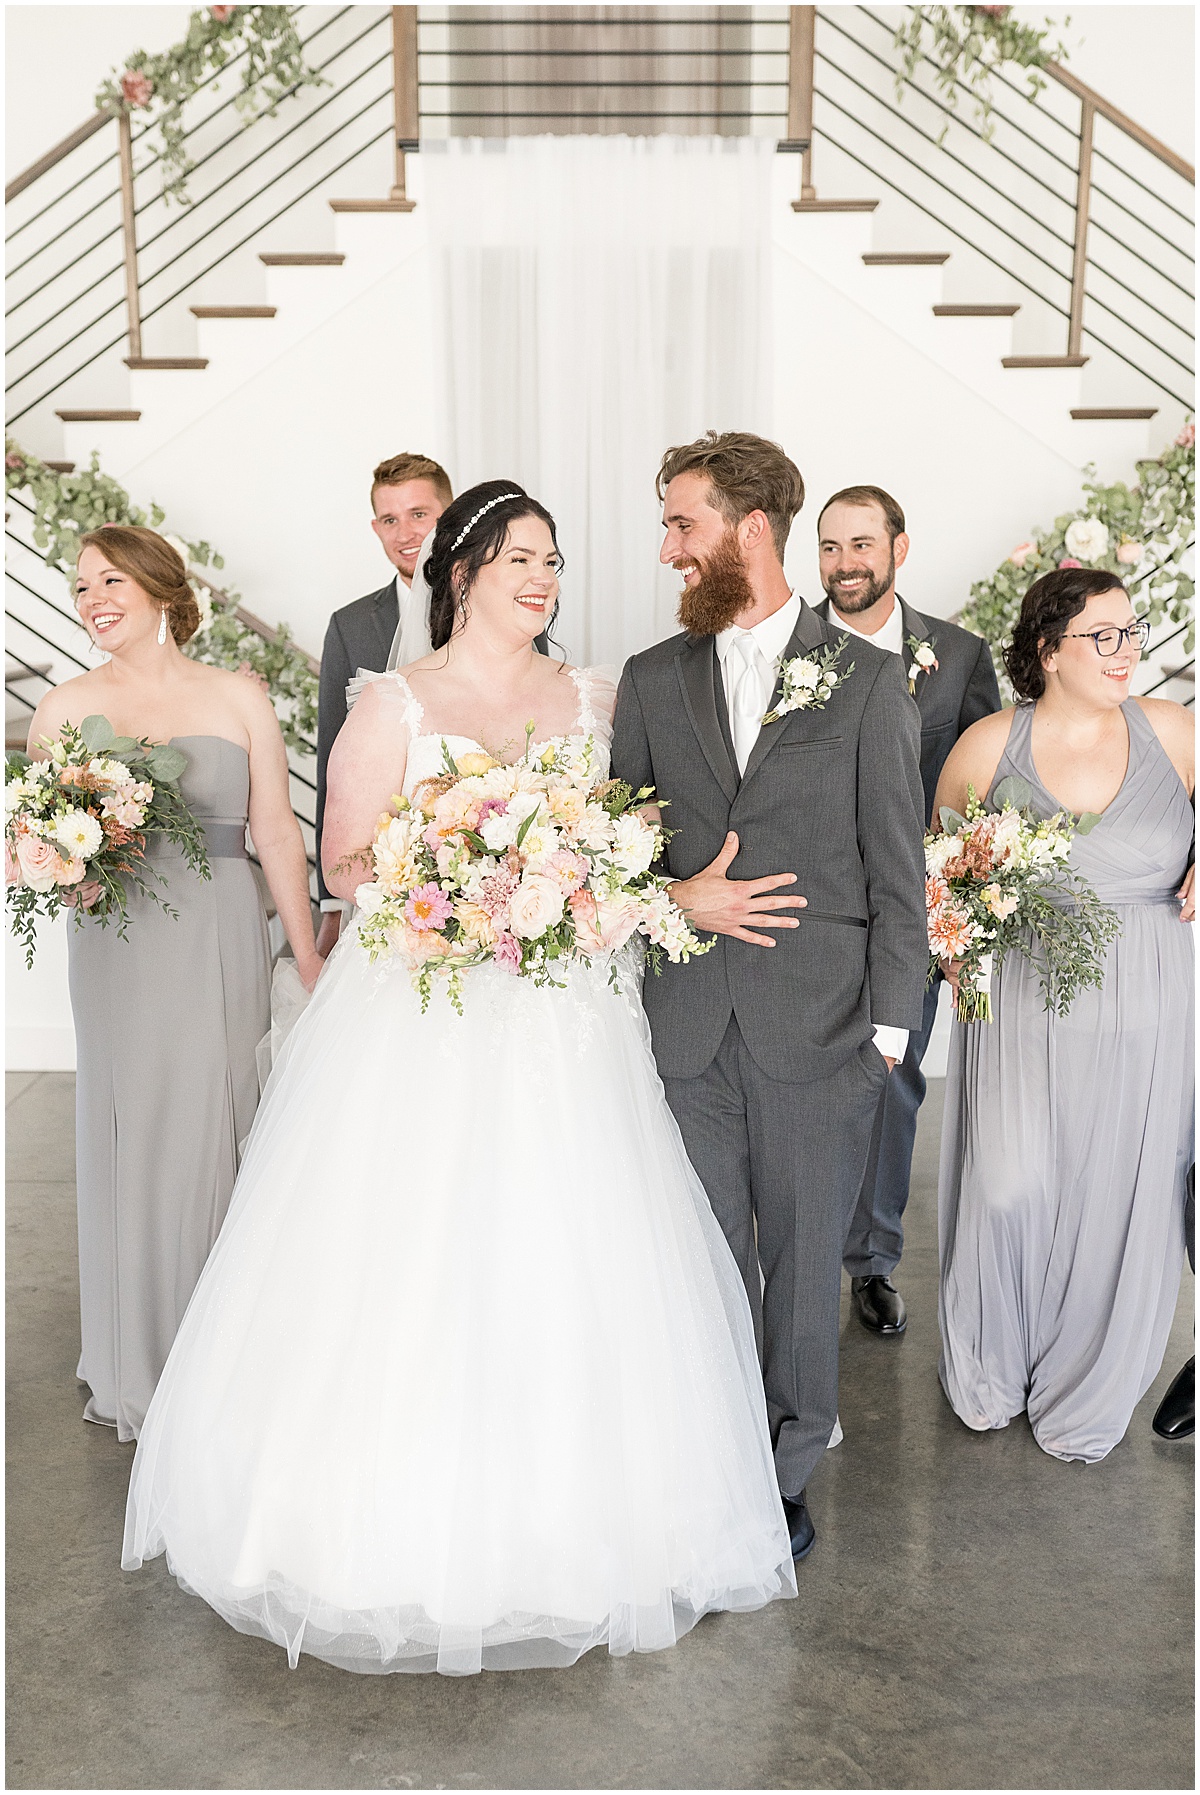 Bridal party walks together at pastel wedding at New Journey Farms in Lafayette, Indiana photographed by Victoria Rayburn Photography